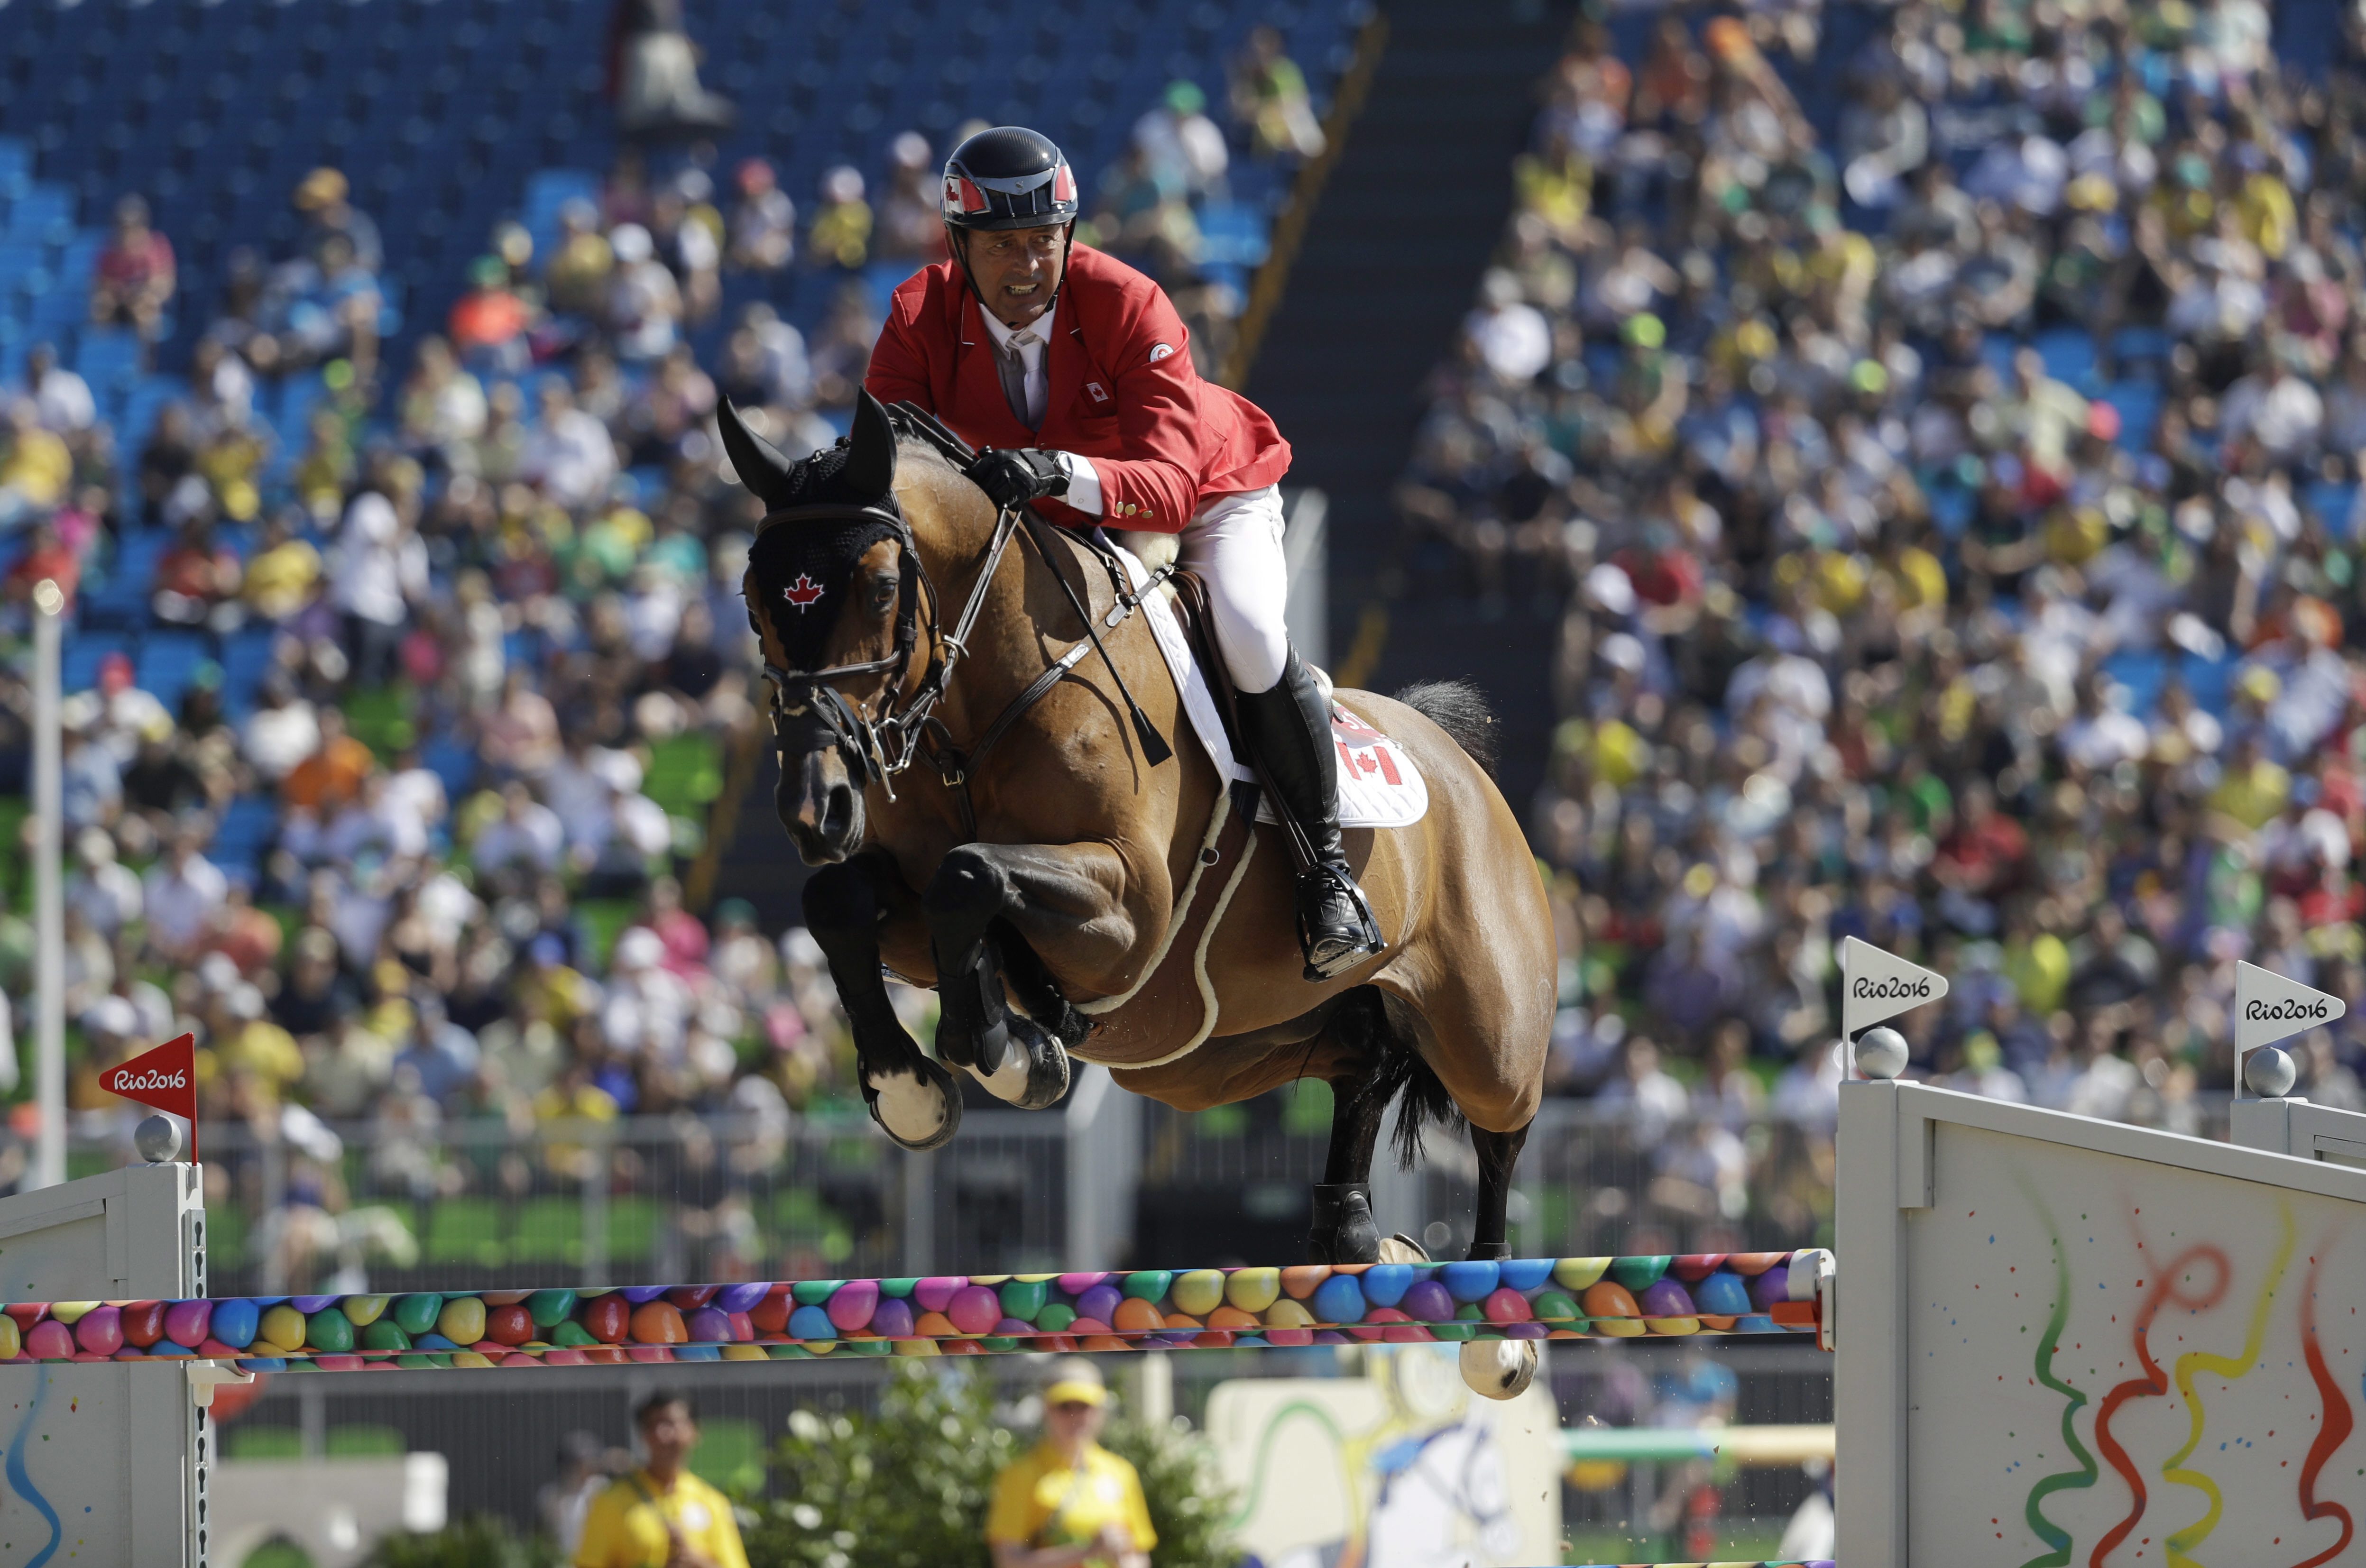 Canada's Yann Candele, riding First Choice 15, competes in the equestrian jumping competition at the 2016 Summer Olympics in Rio de Janeiro, Brazil, Sunday, Aug. 14, 2016. (AP Photo/John Locher)